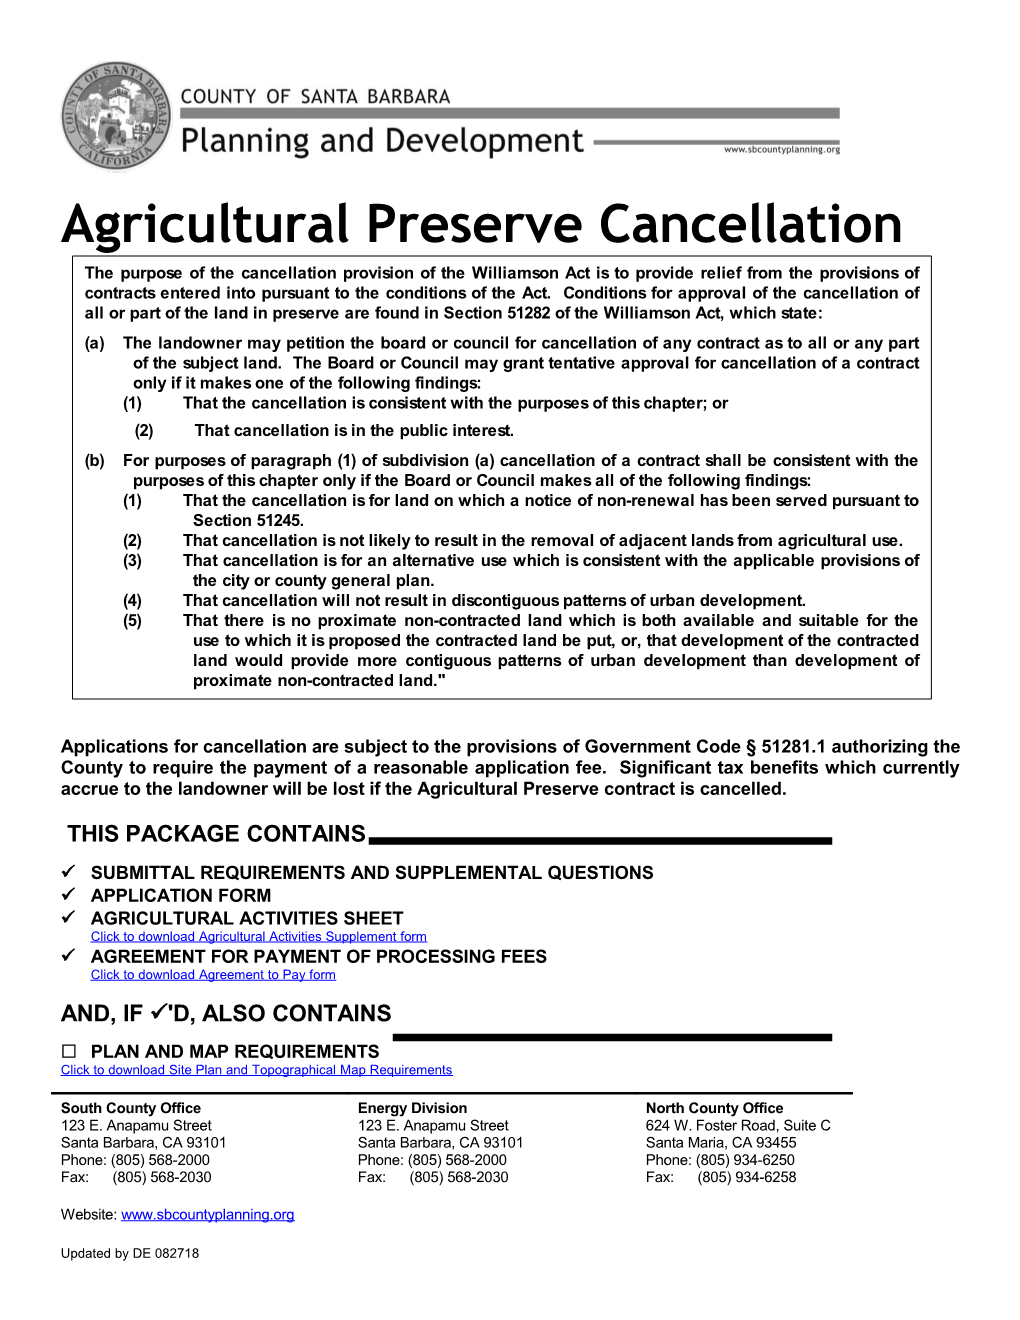 Agricultural Preserve Contract - Cancellation